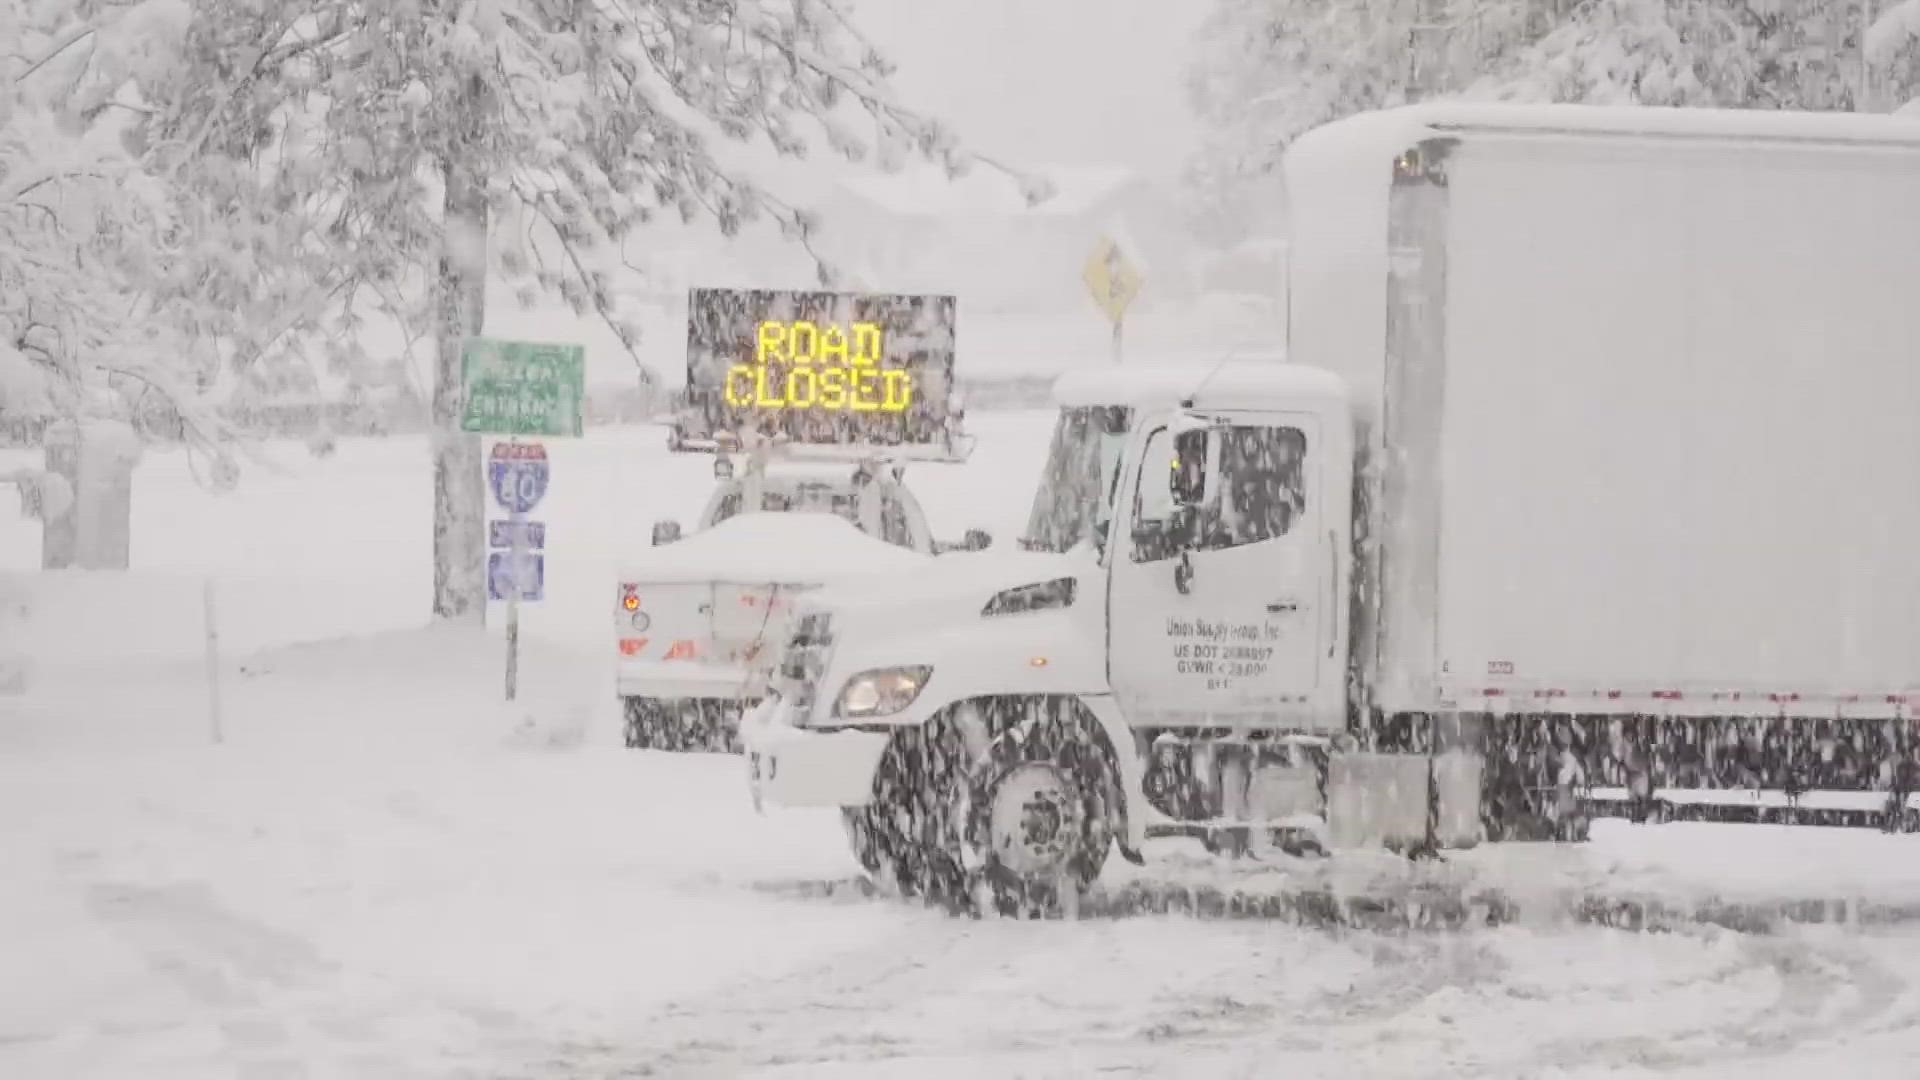 Residents, visitors and those just traveling through the Sierra dealt with icy and snowy conditions, Saturday.